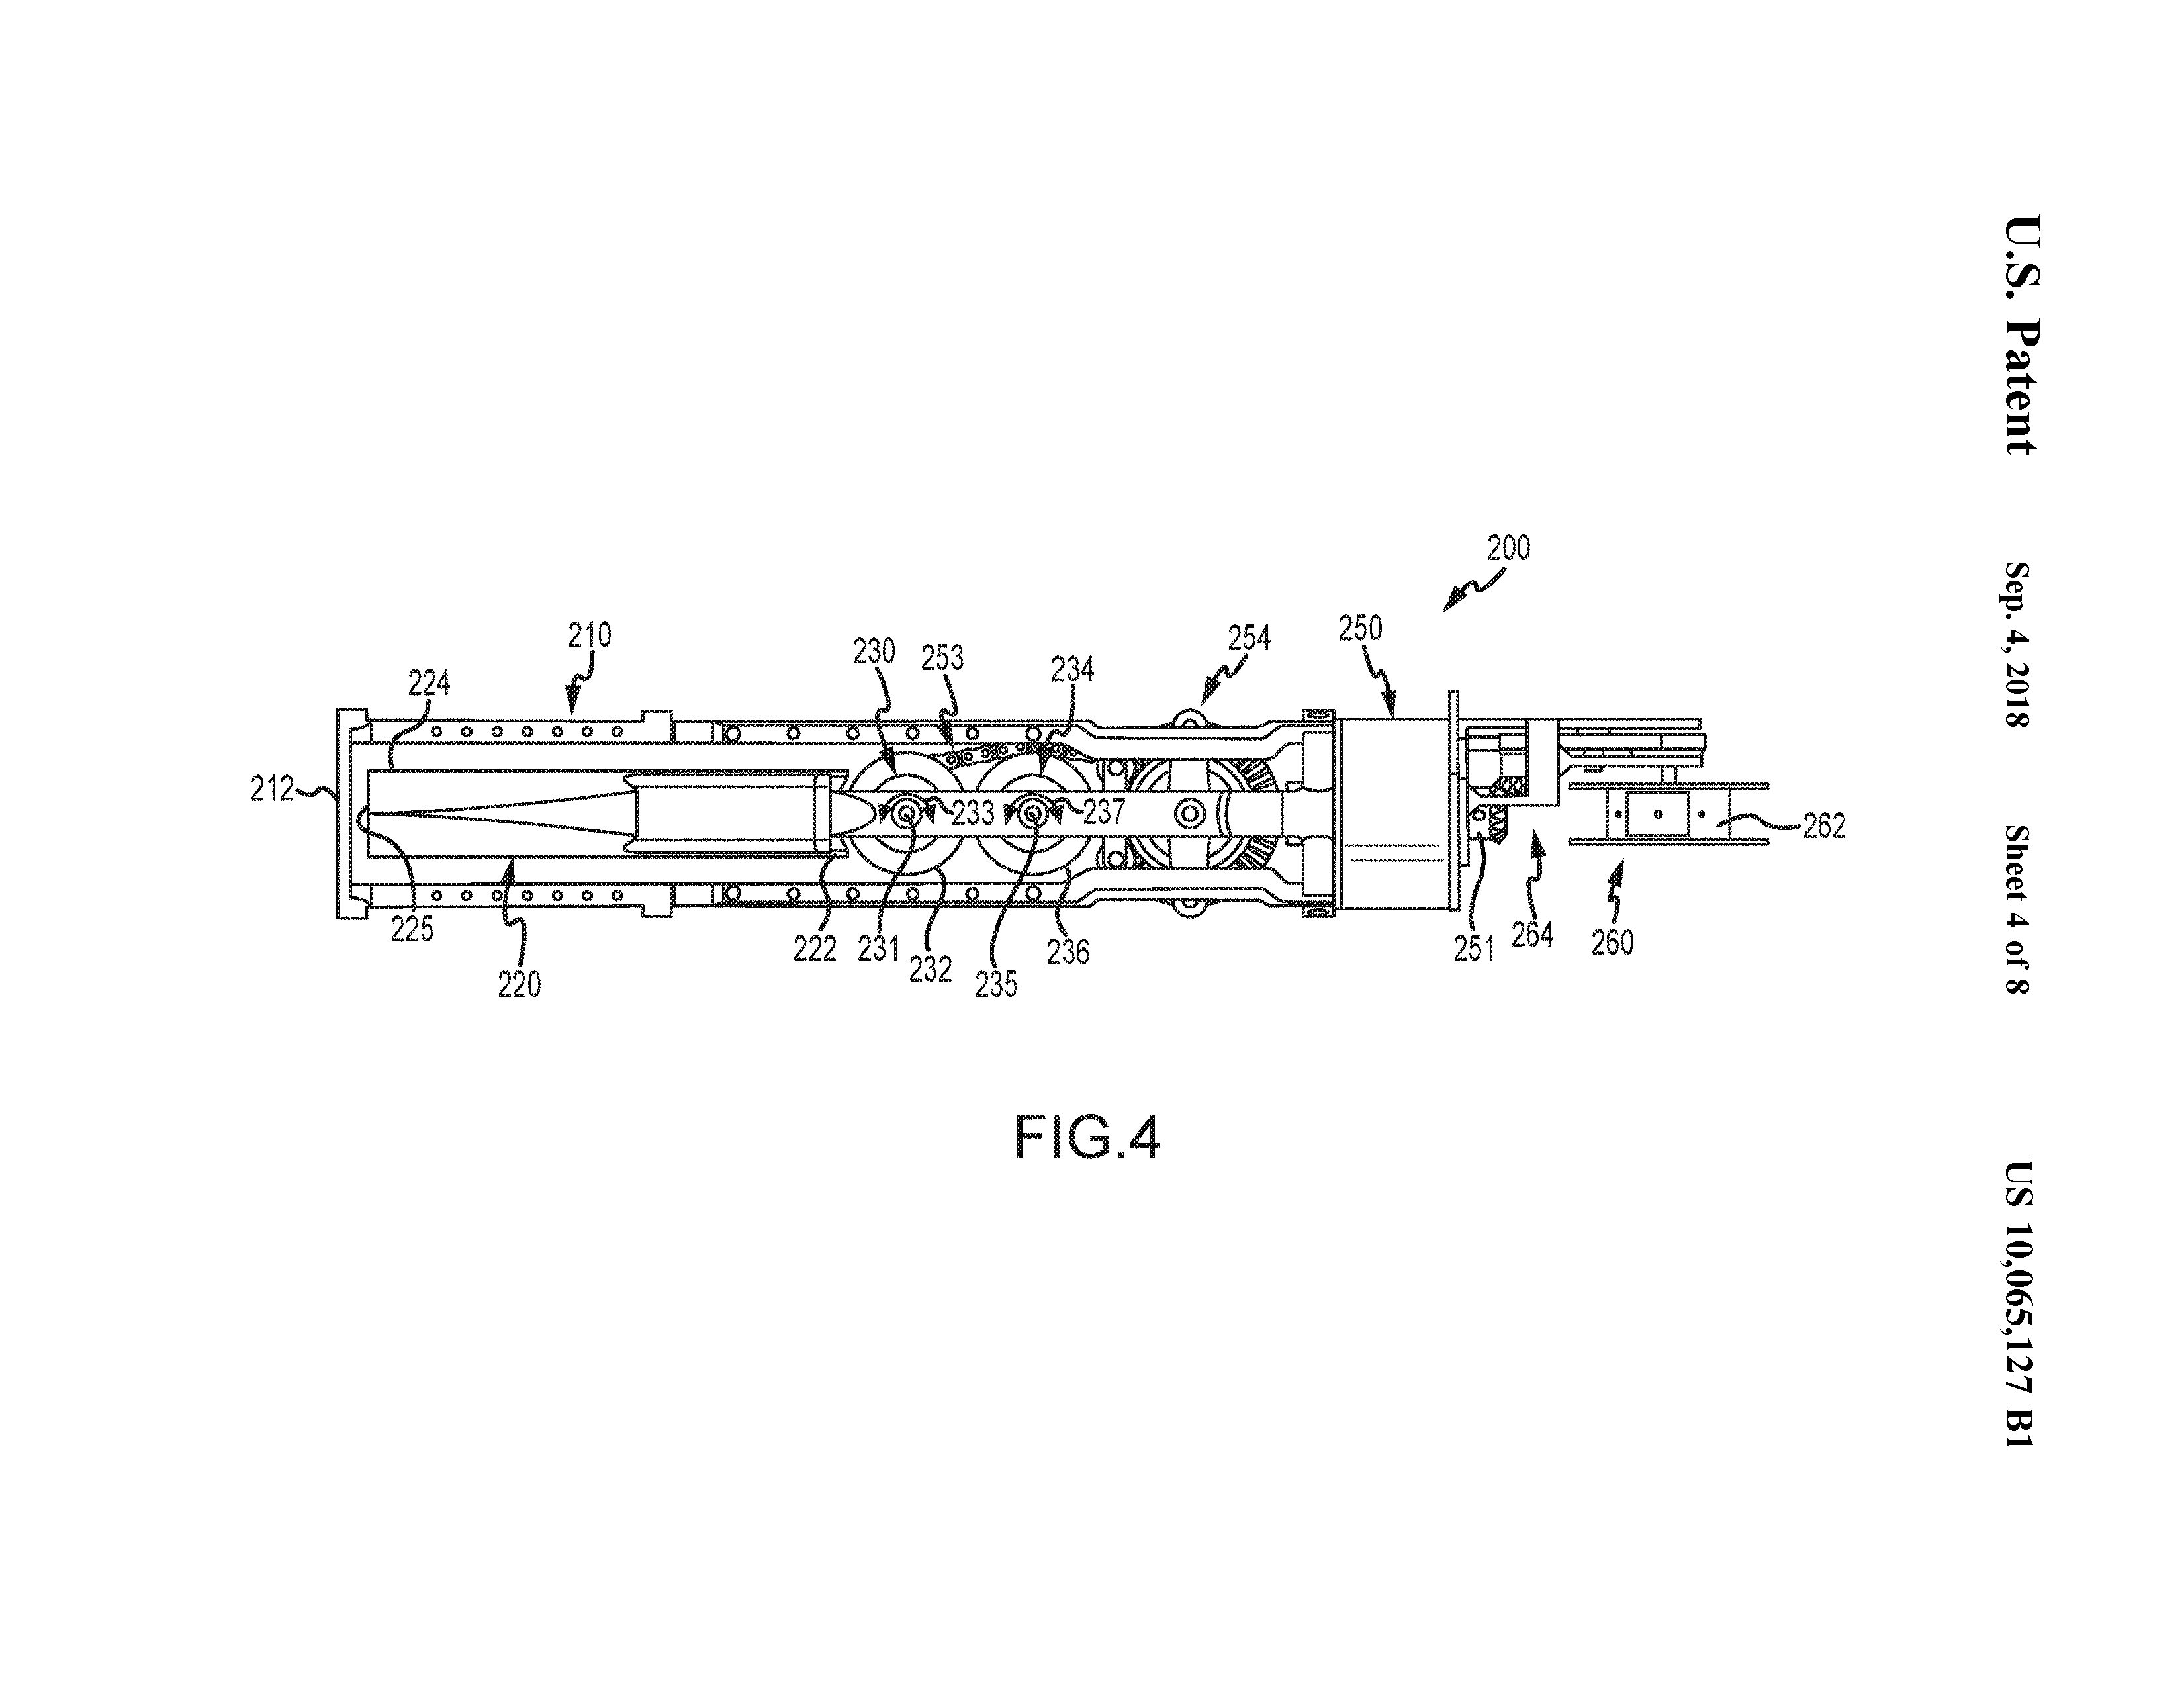 Image from U.S. Patent 10,065,127, the patented lightsaber available to create inside Star Wars: Galaxy's Edge